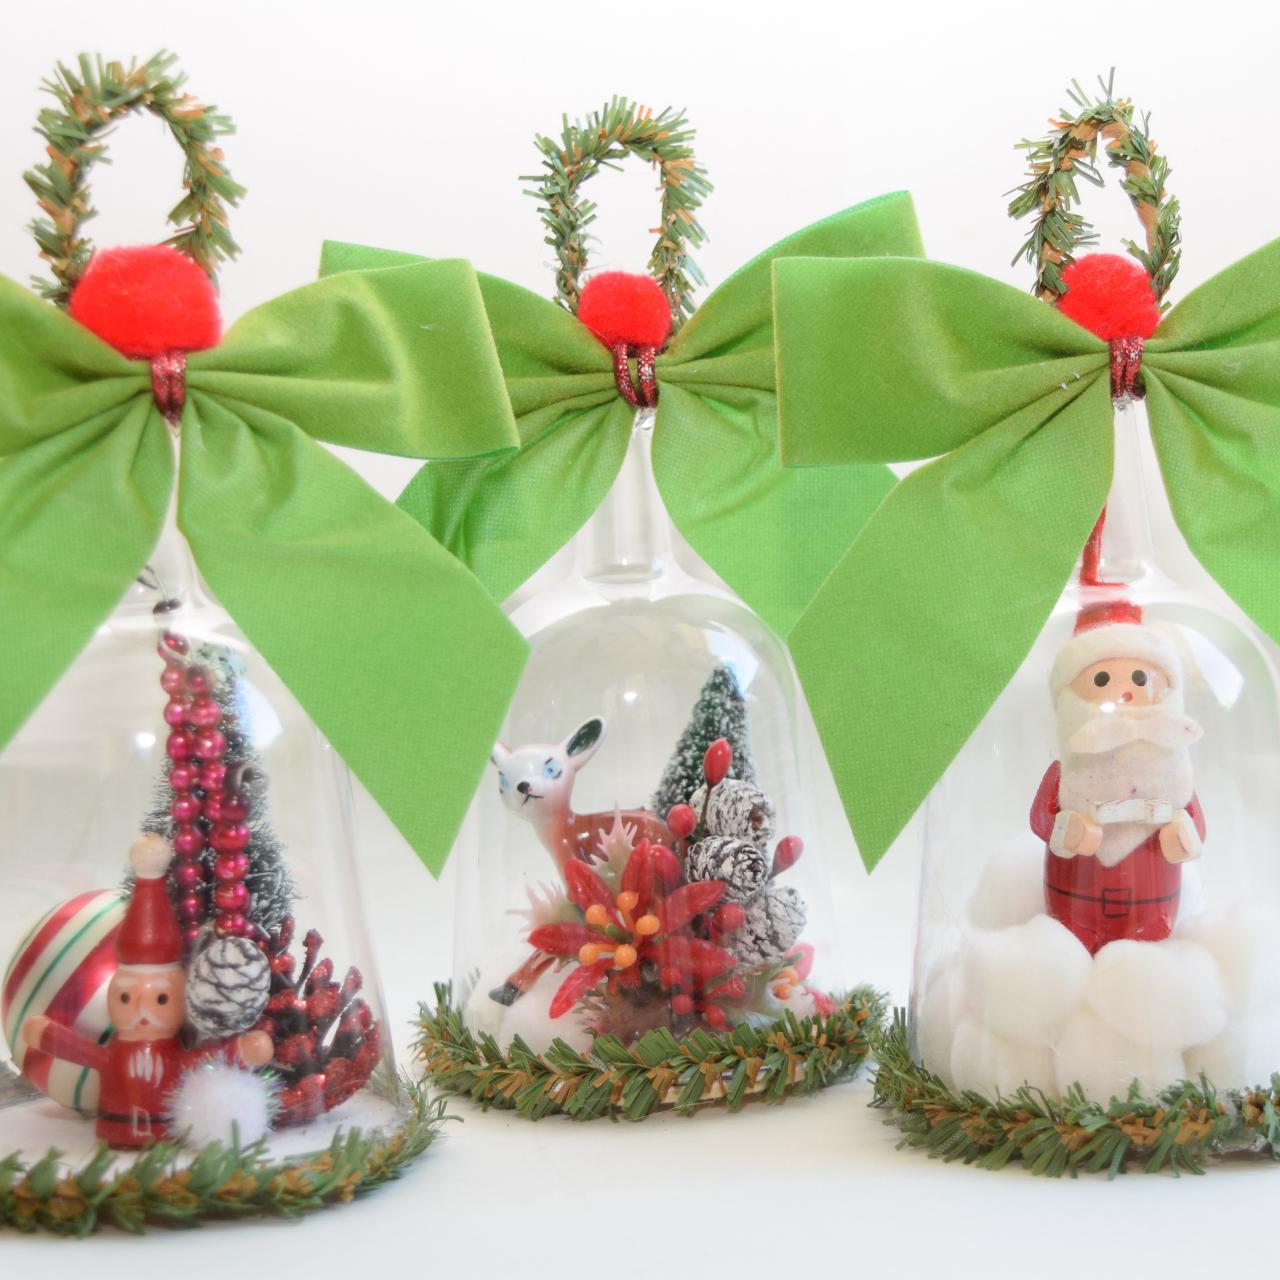 DIY Holiday Snow Globes for Kids